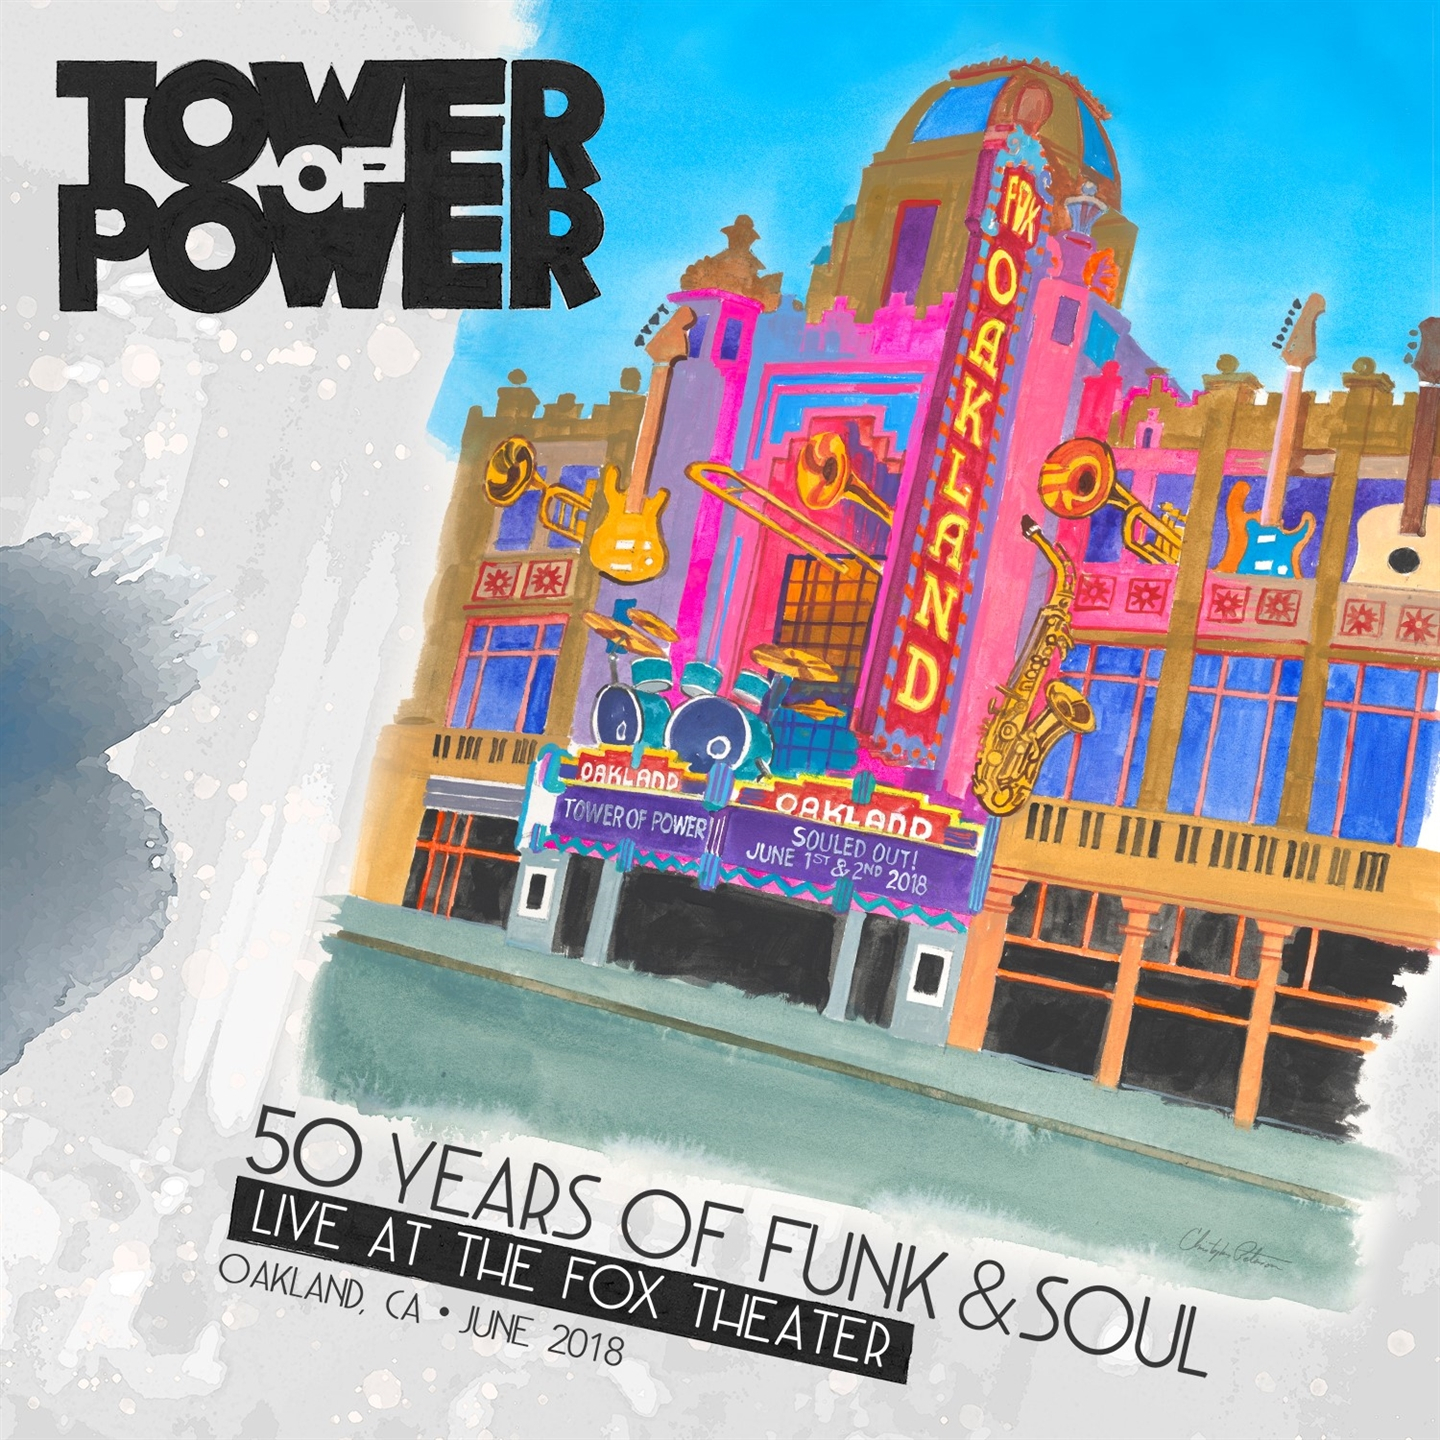 50 YEARS OF FUNK & SOUL: LIVE AT THE FOX THEATER [3 LP]